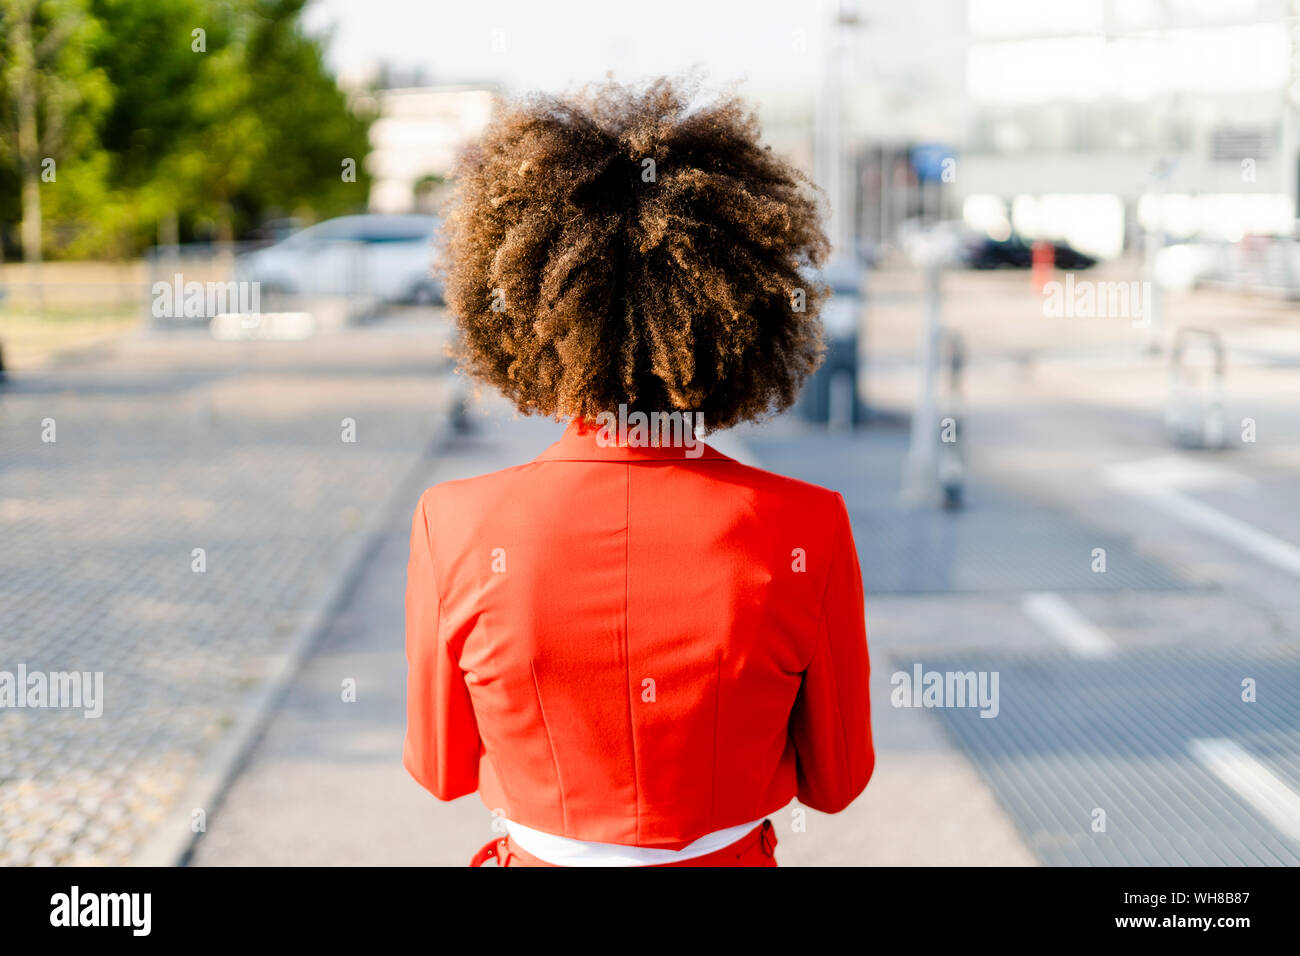 Back view of young woman wearing fashionable red suit jacket Stock Photo